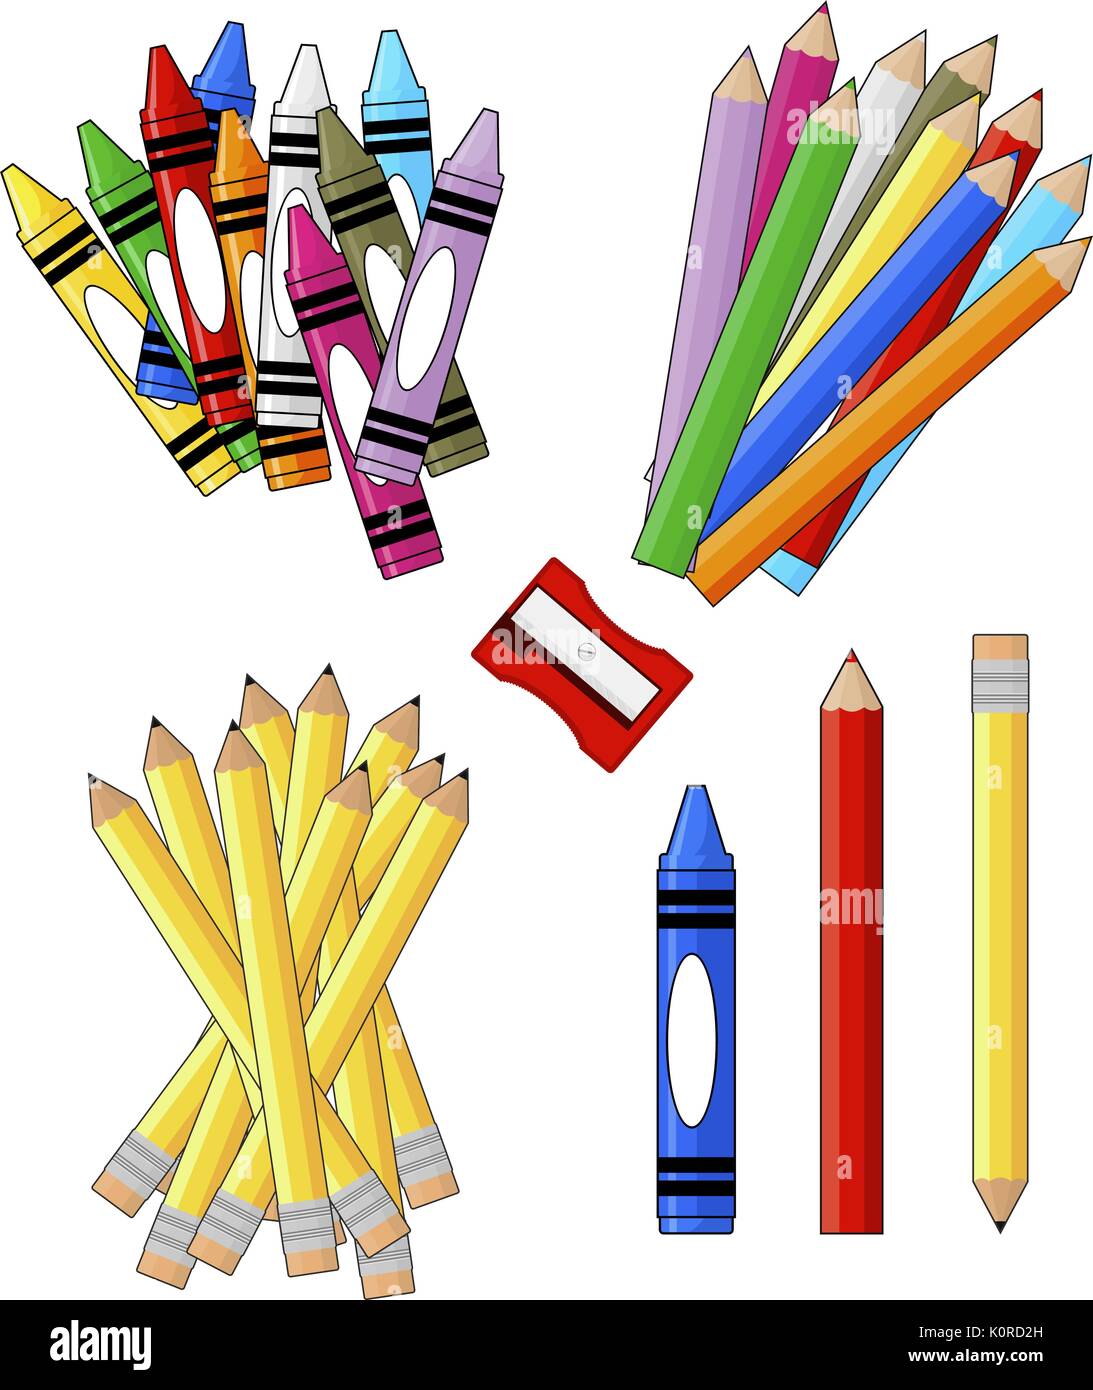 https://c8.alamy.com/comp/K0RD2H/school-supplies-groups-clip-art-isolated-on-white-background-in-vector-K0RD2H.jpg